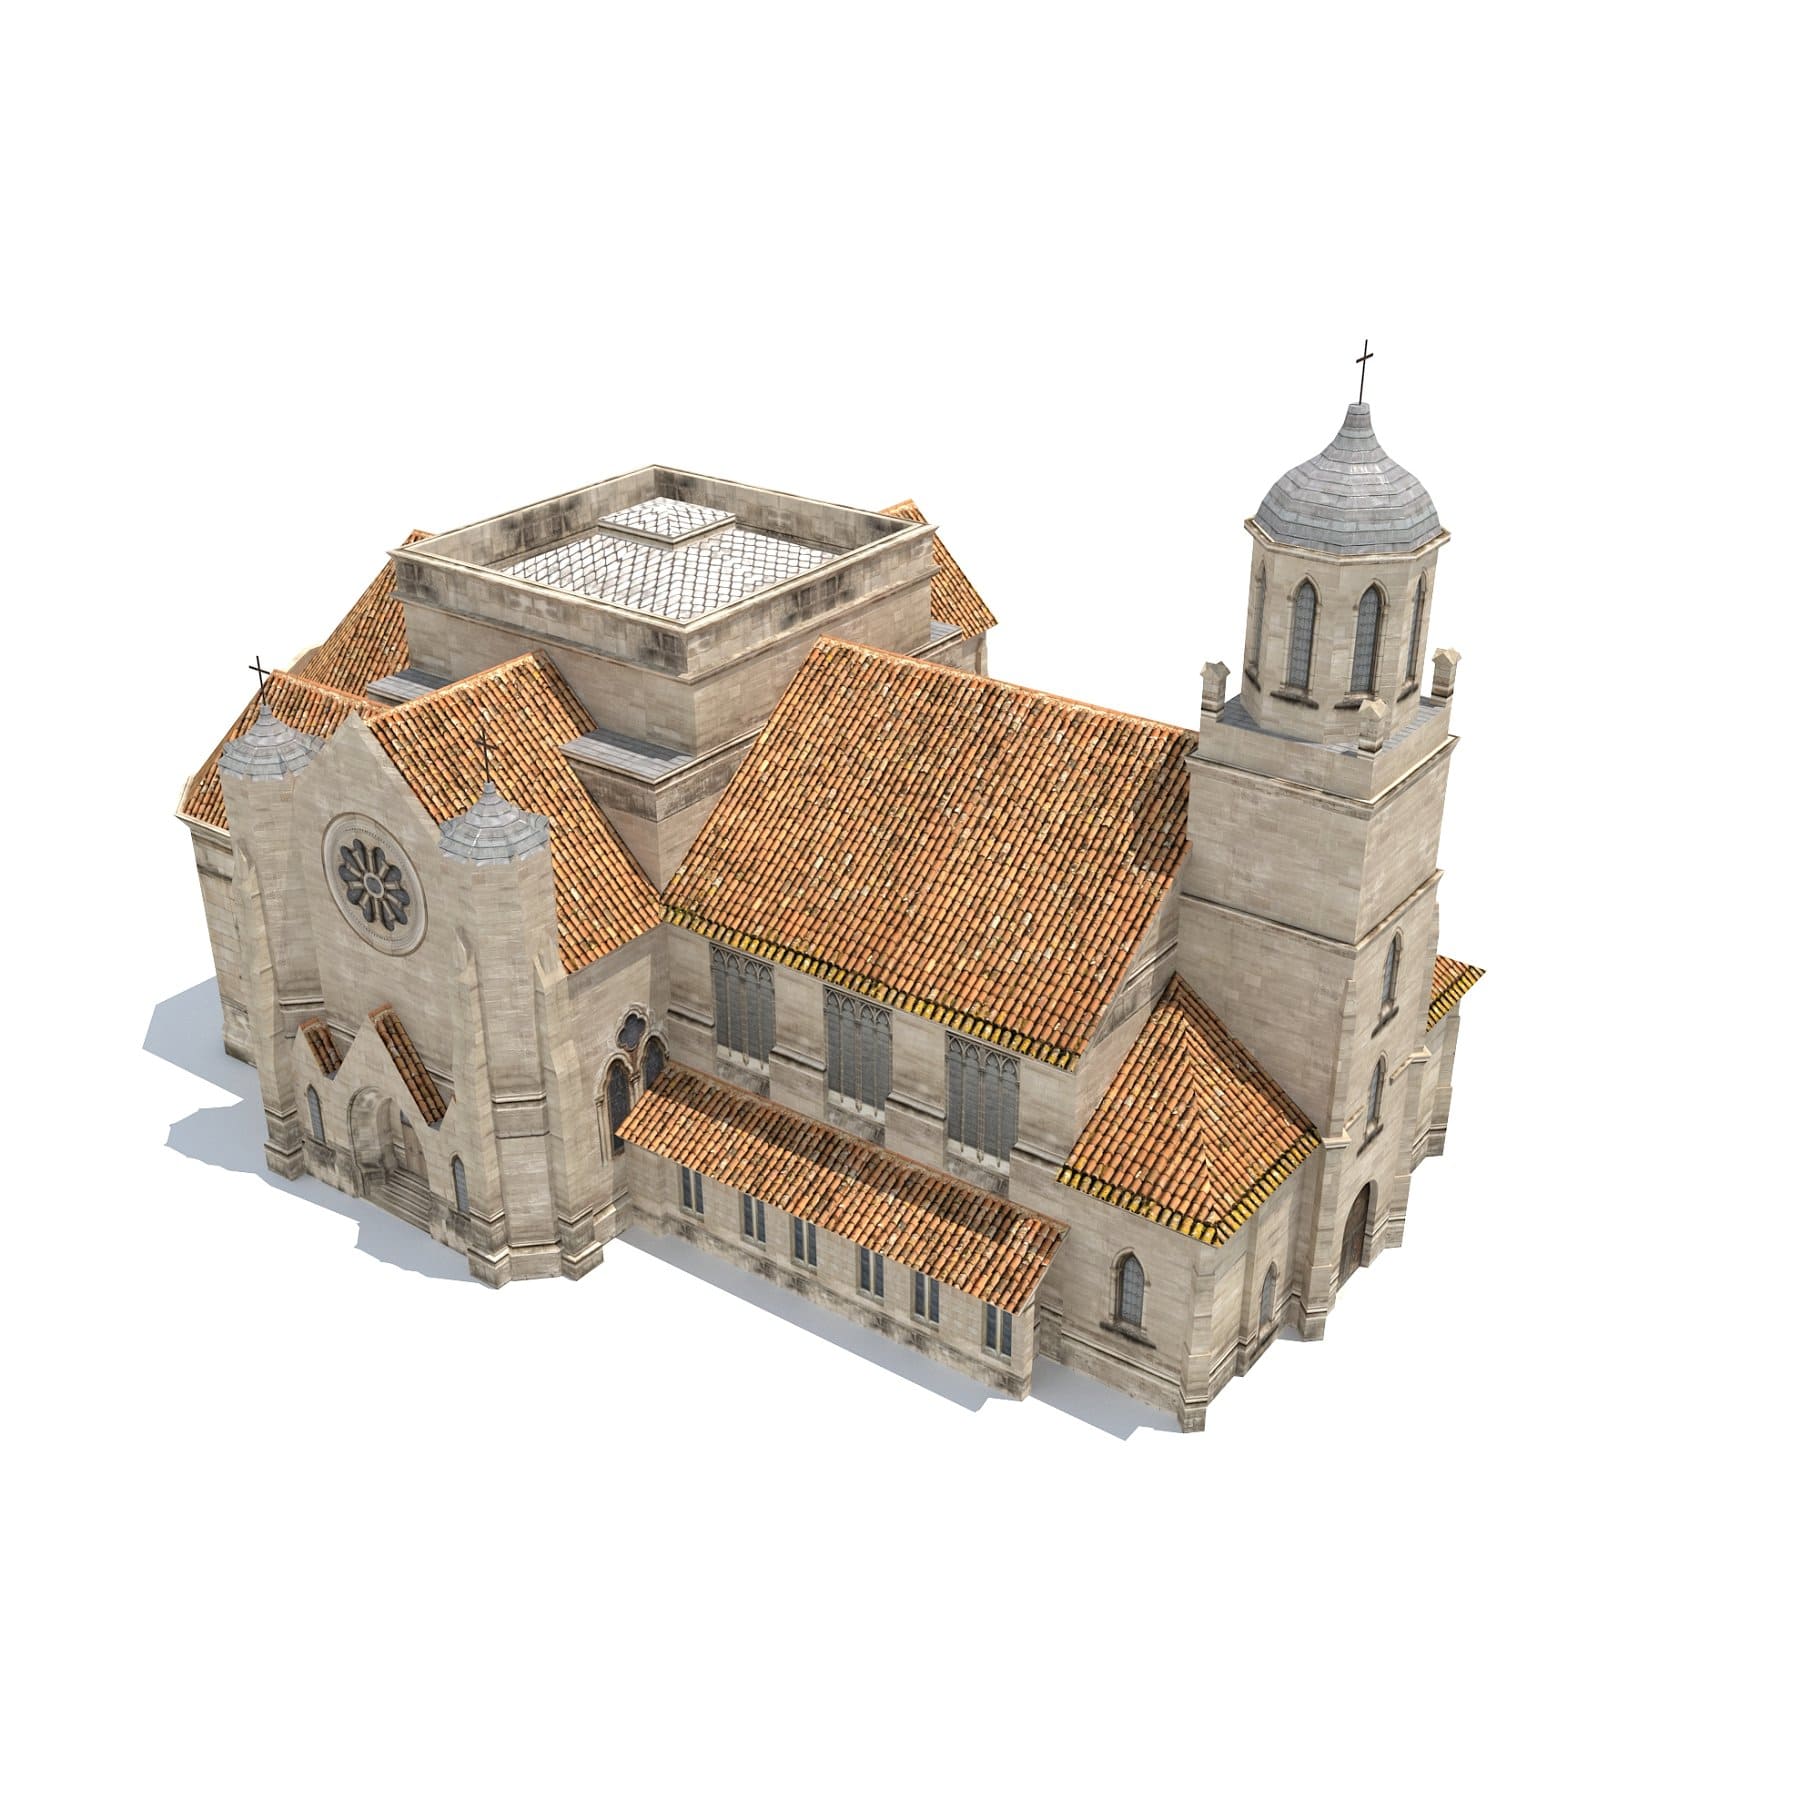 Different types of roofs of the church building can be seen from above.